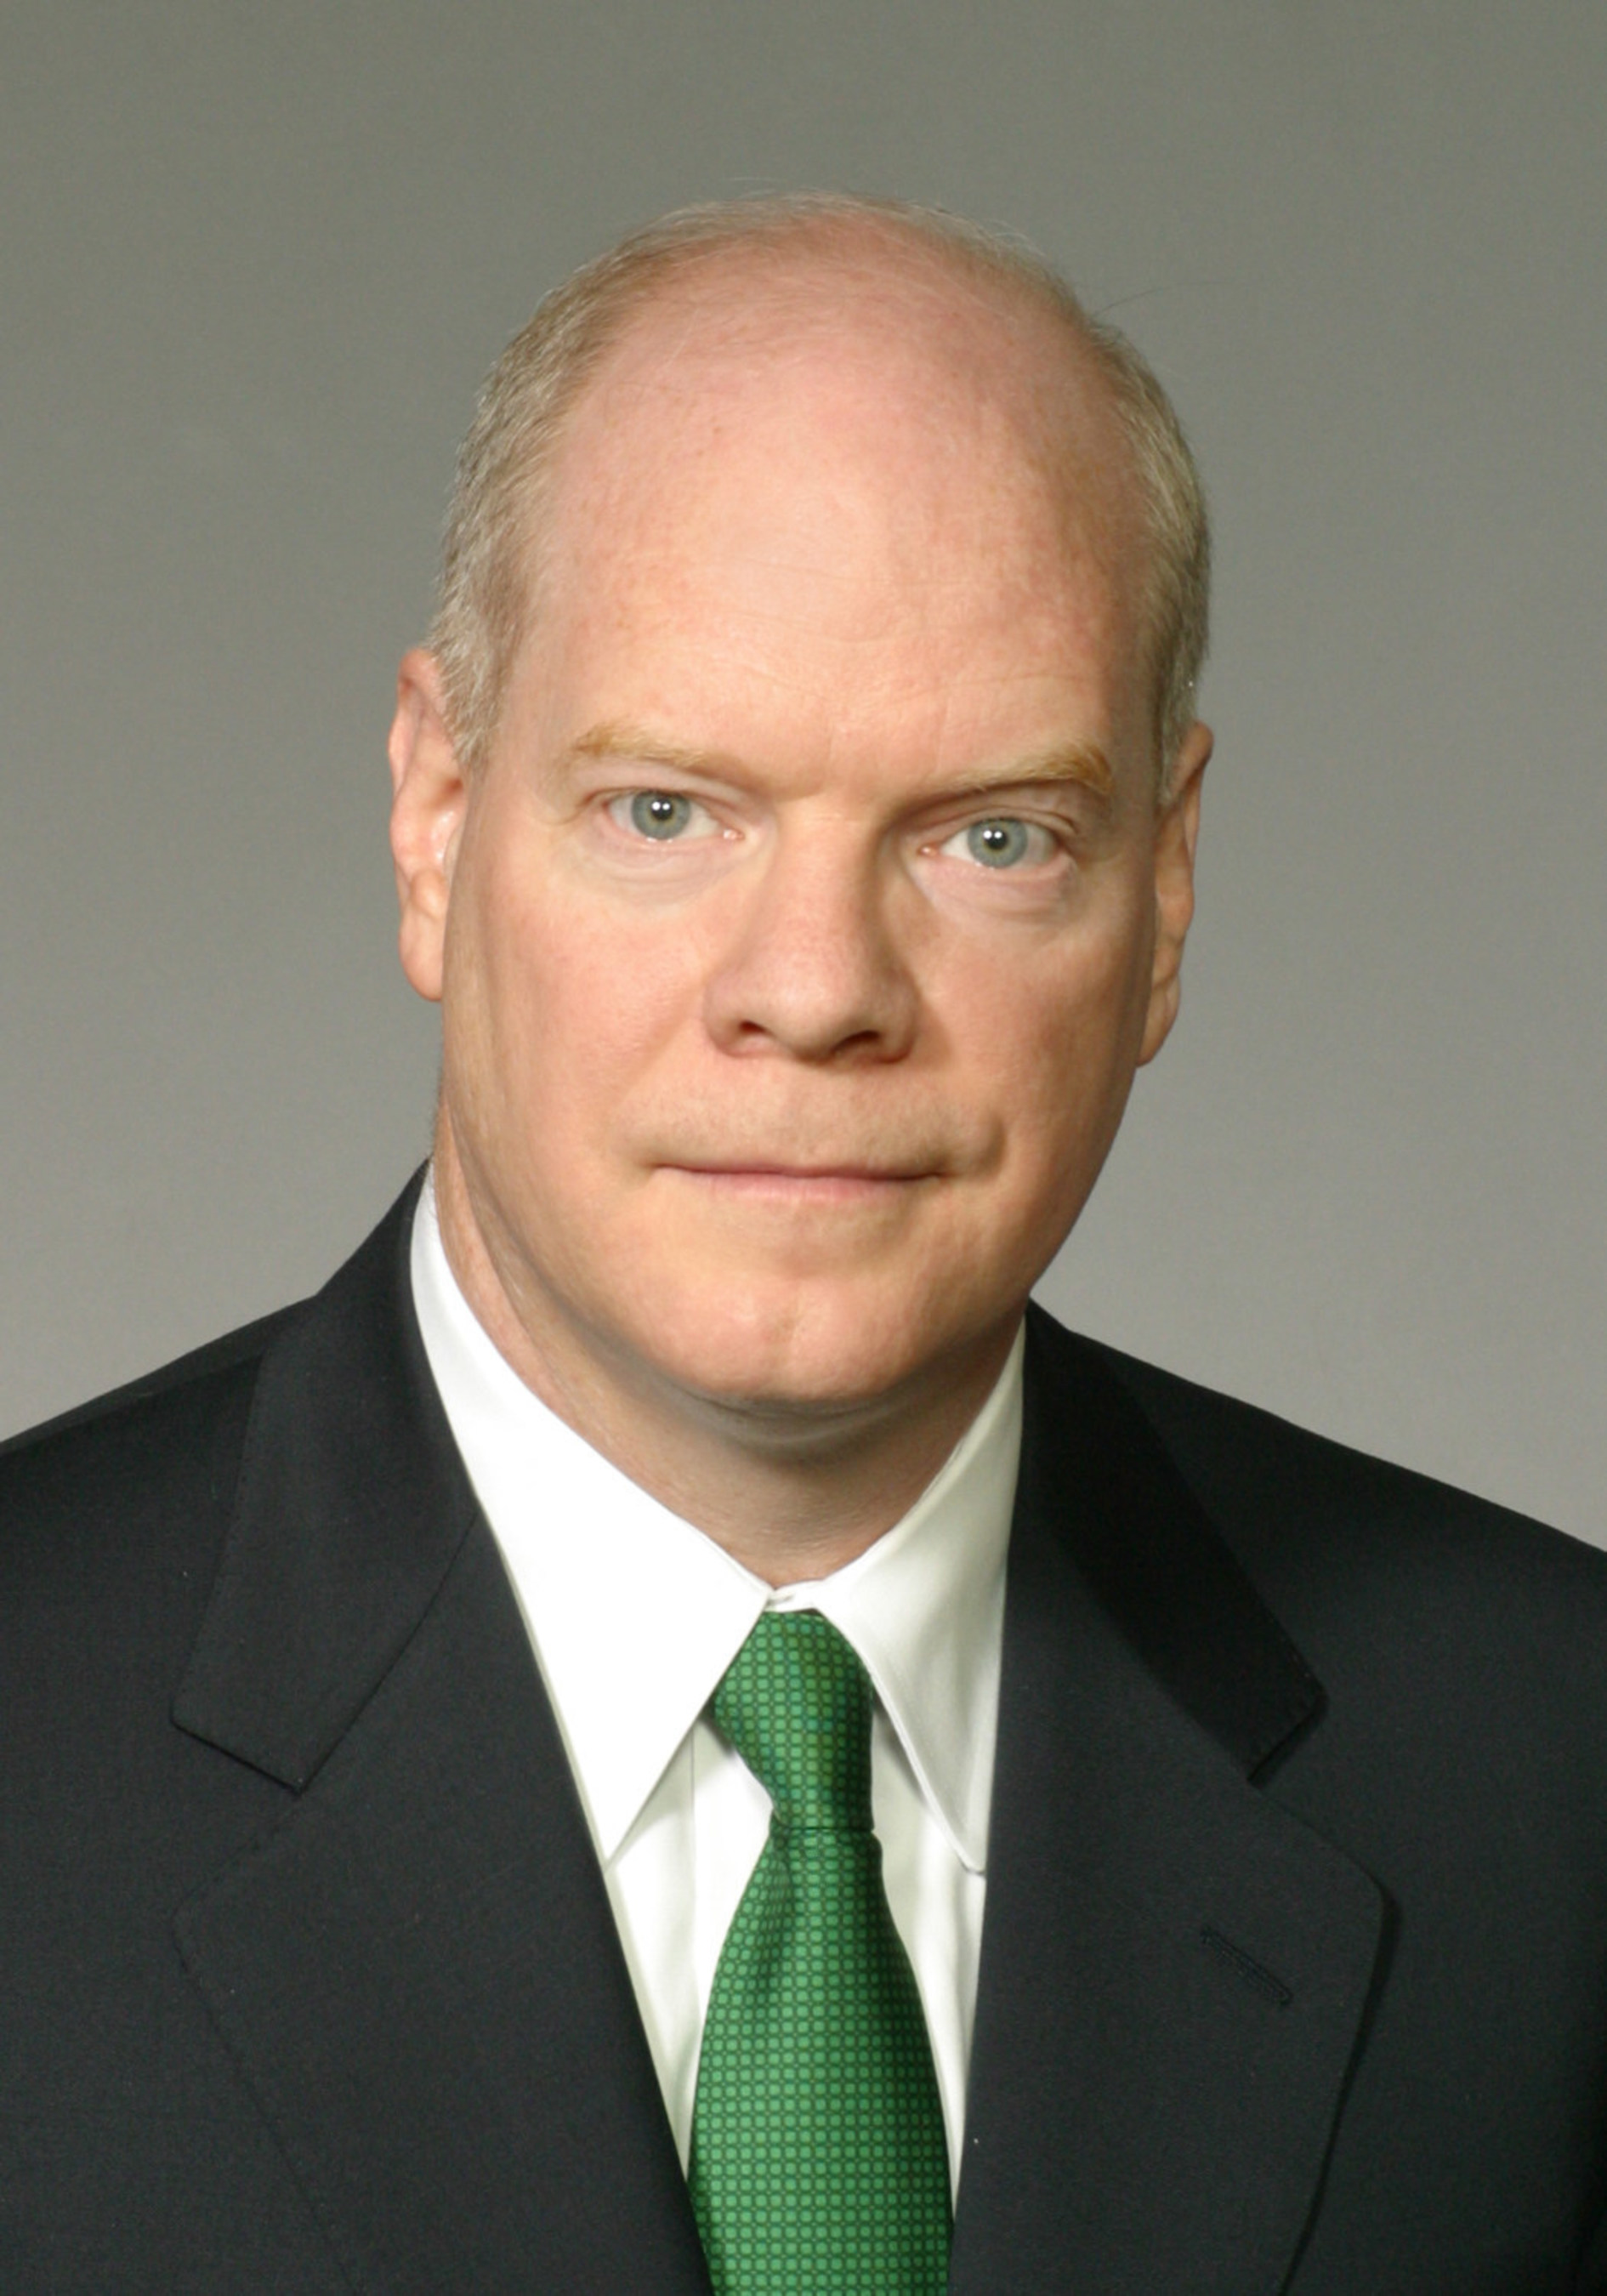 Michael J. Mack. Jr. will retire as Group President, John Deere Financial Services, Global Human Resources and Public Affairs at Deere & Company, effective November 1.